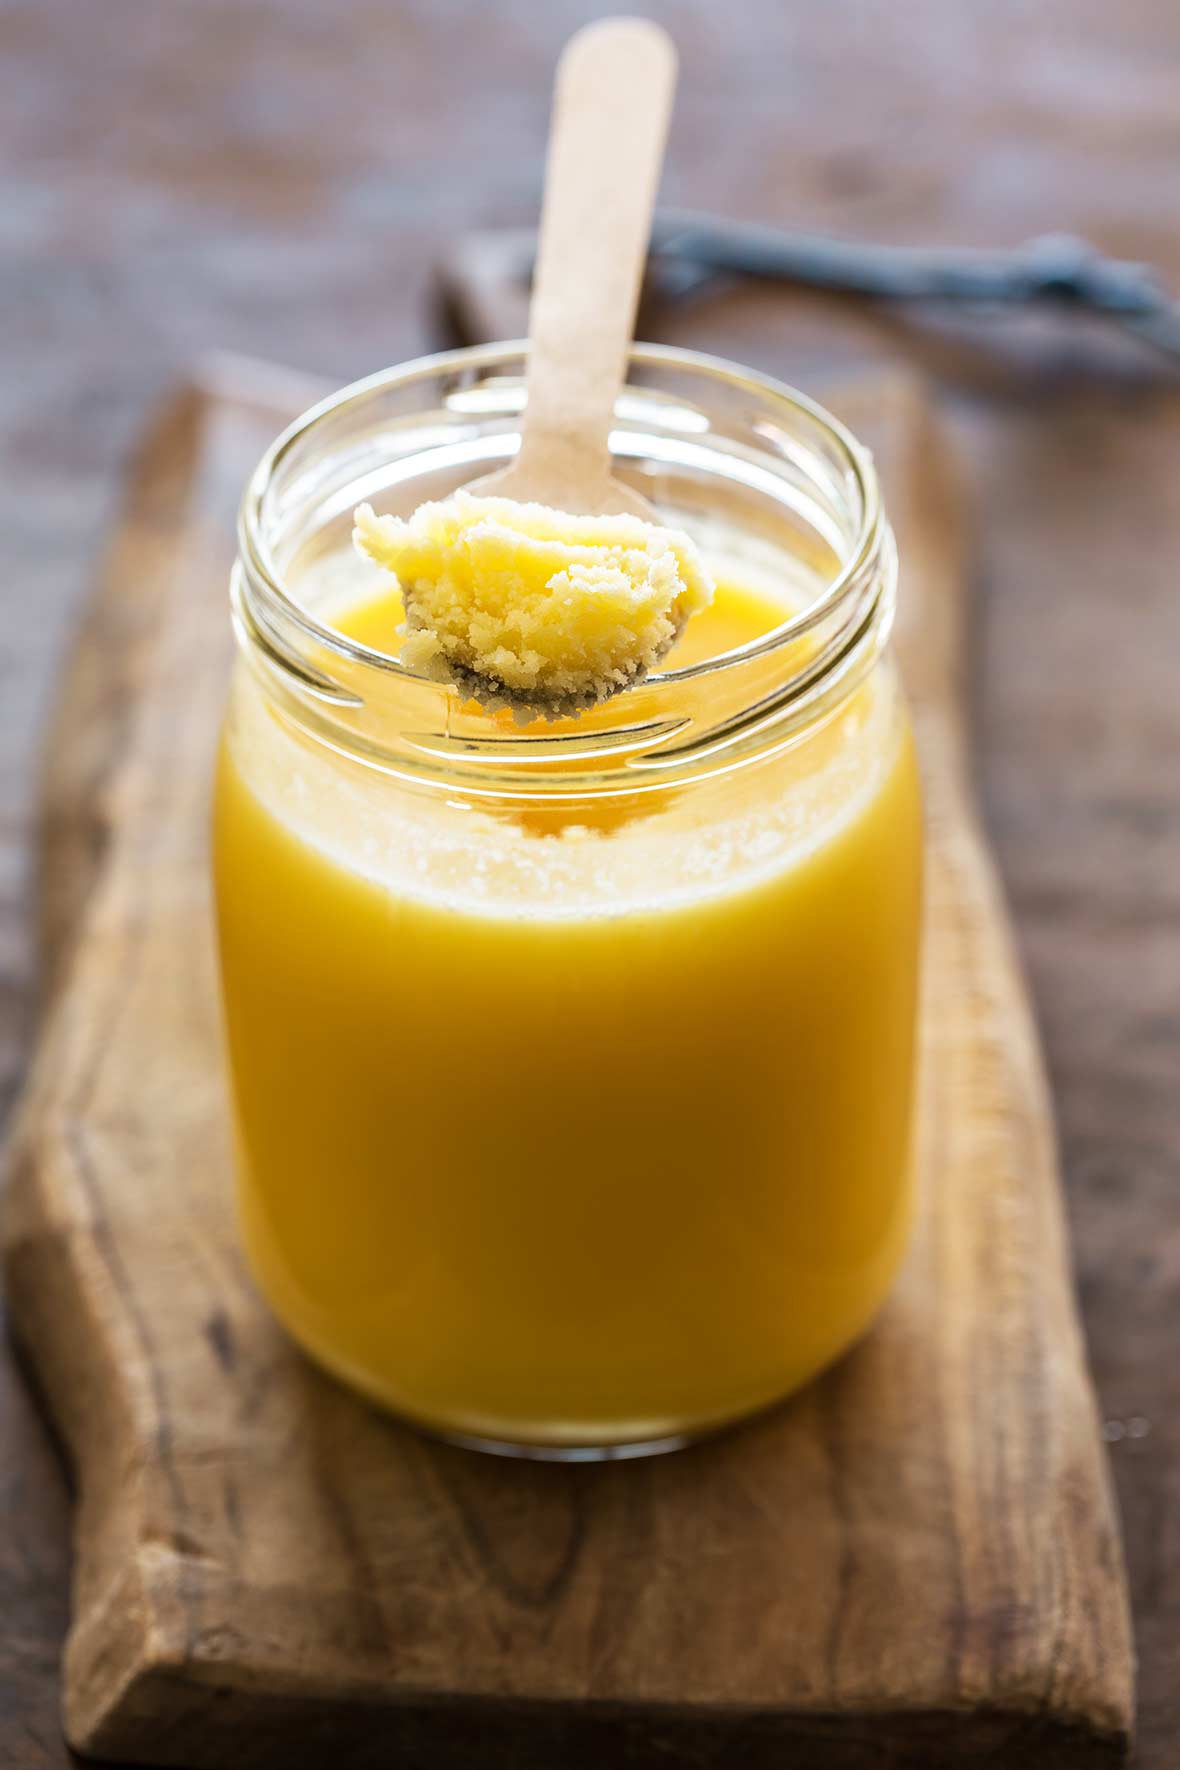 Mason jar filled with Indian ghee or clarified butter on a wooden plank